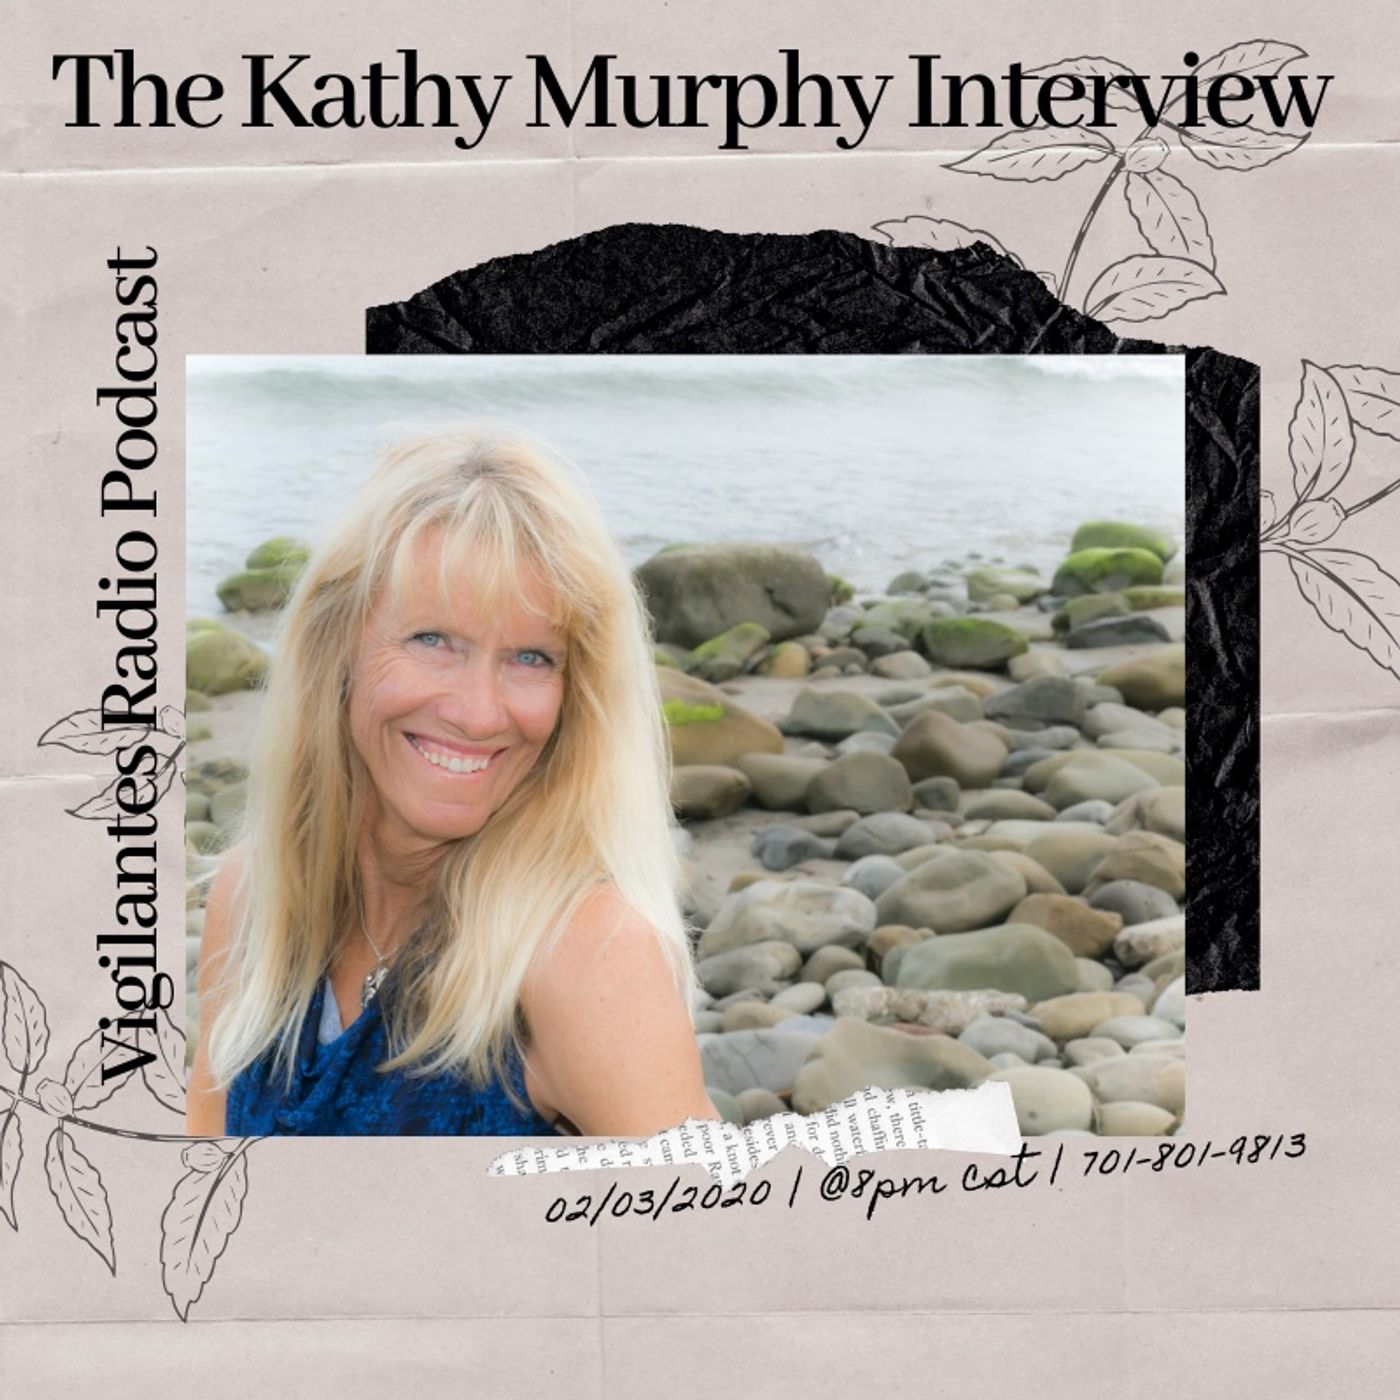 The Kathy Murphy Interview. Image